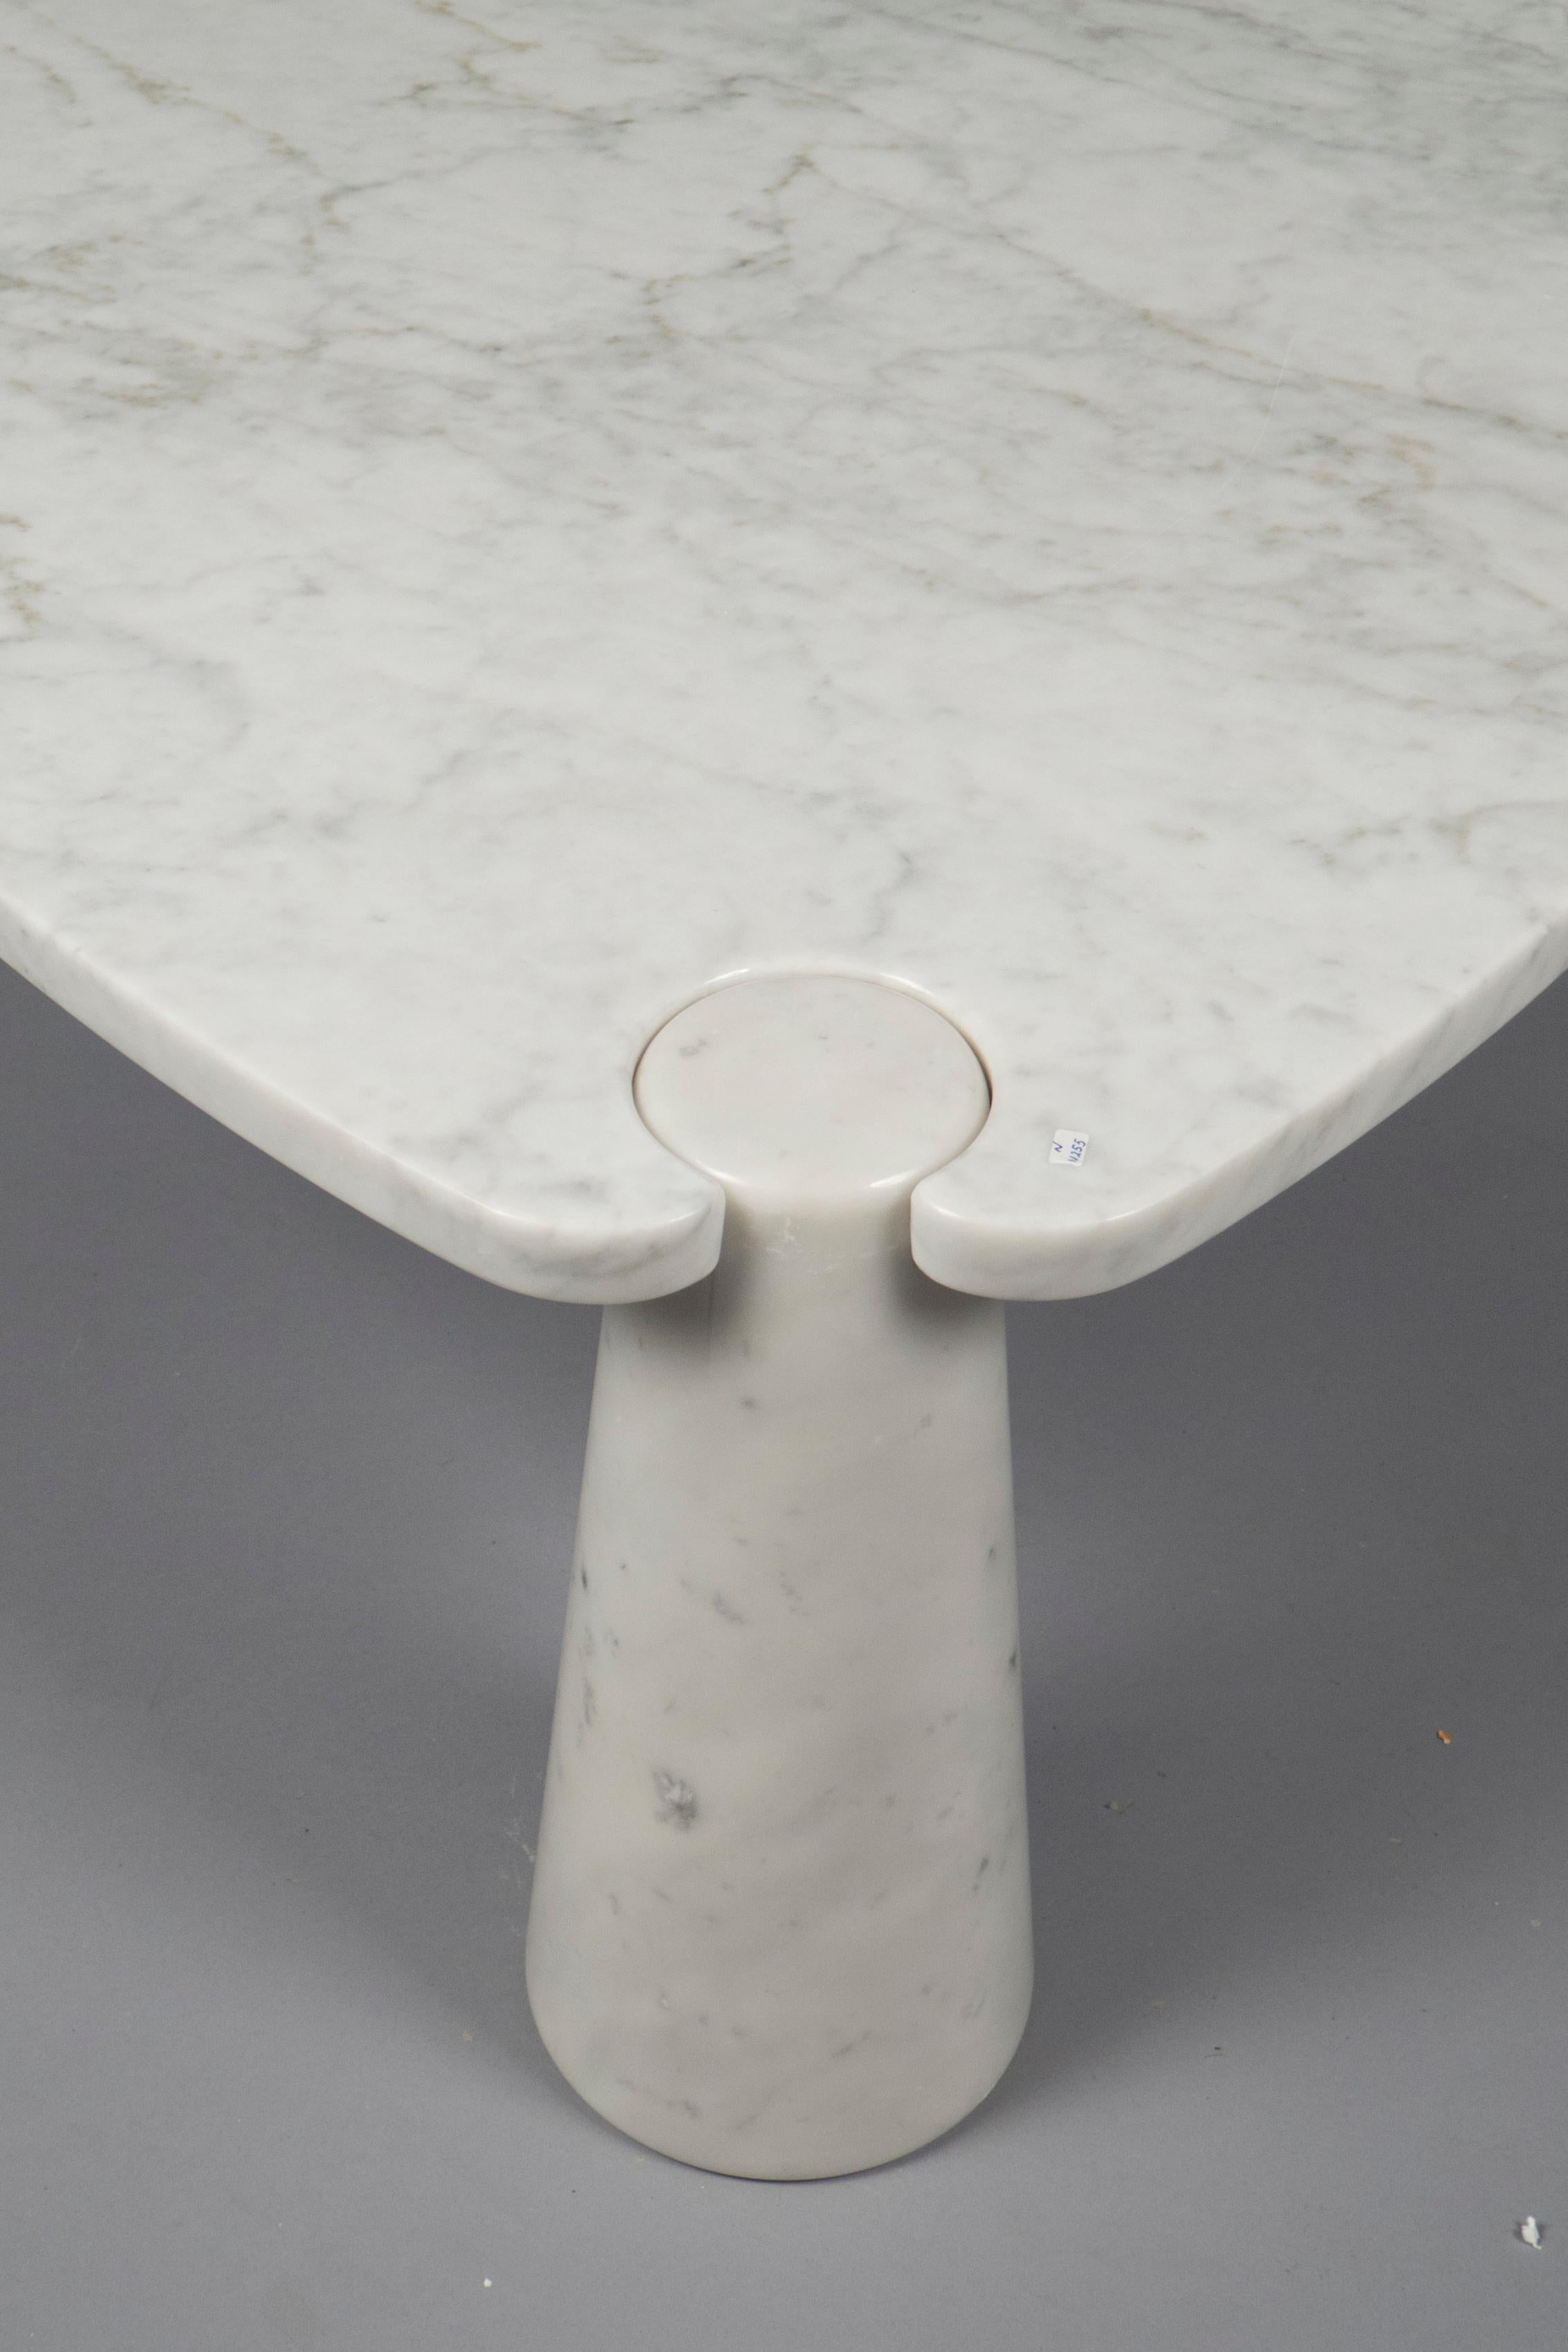 Triangular coffee table of a white and grey veined marble top, which rests on three cone shaped legs of the same material. Eros series.